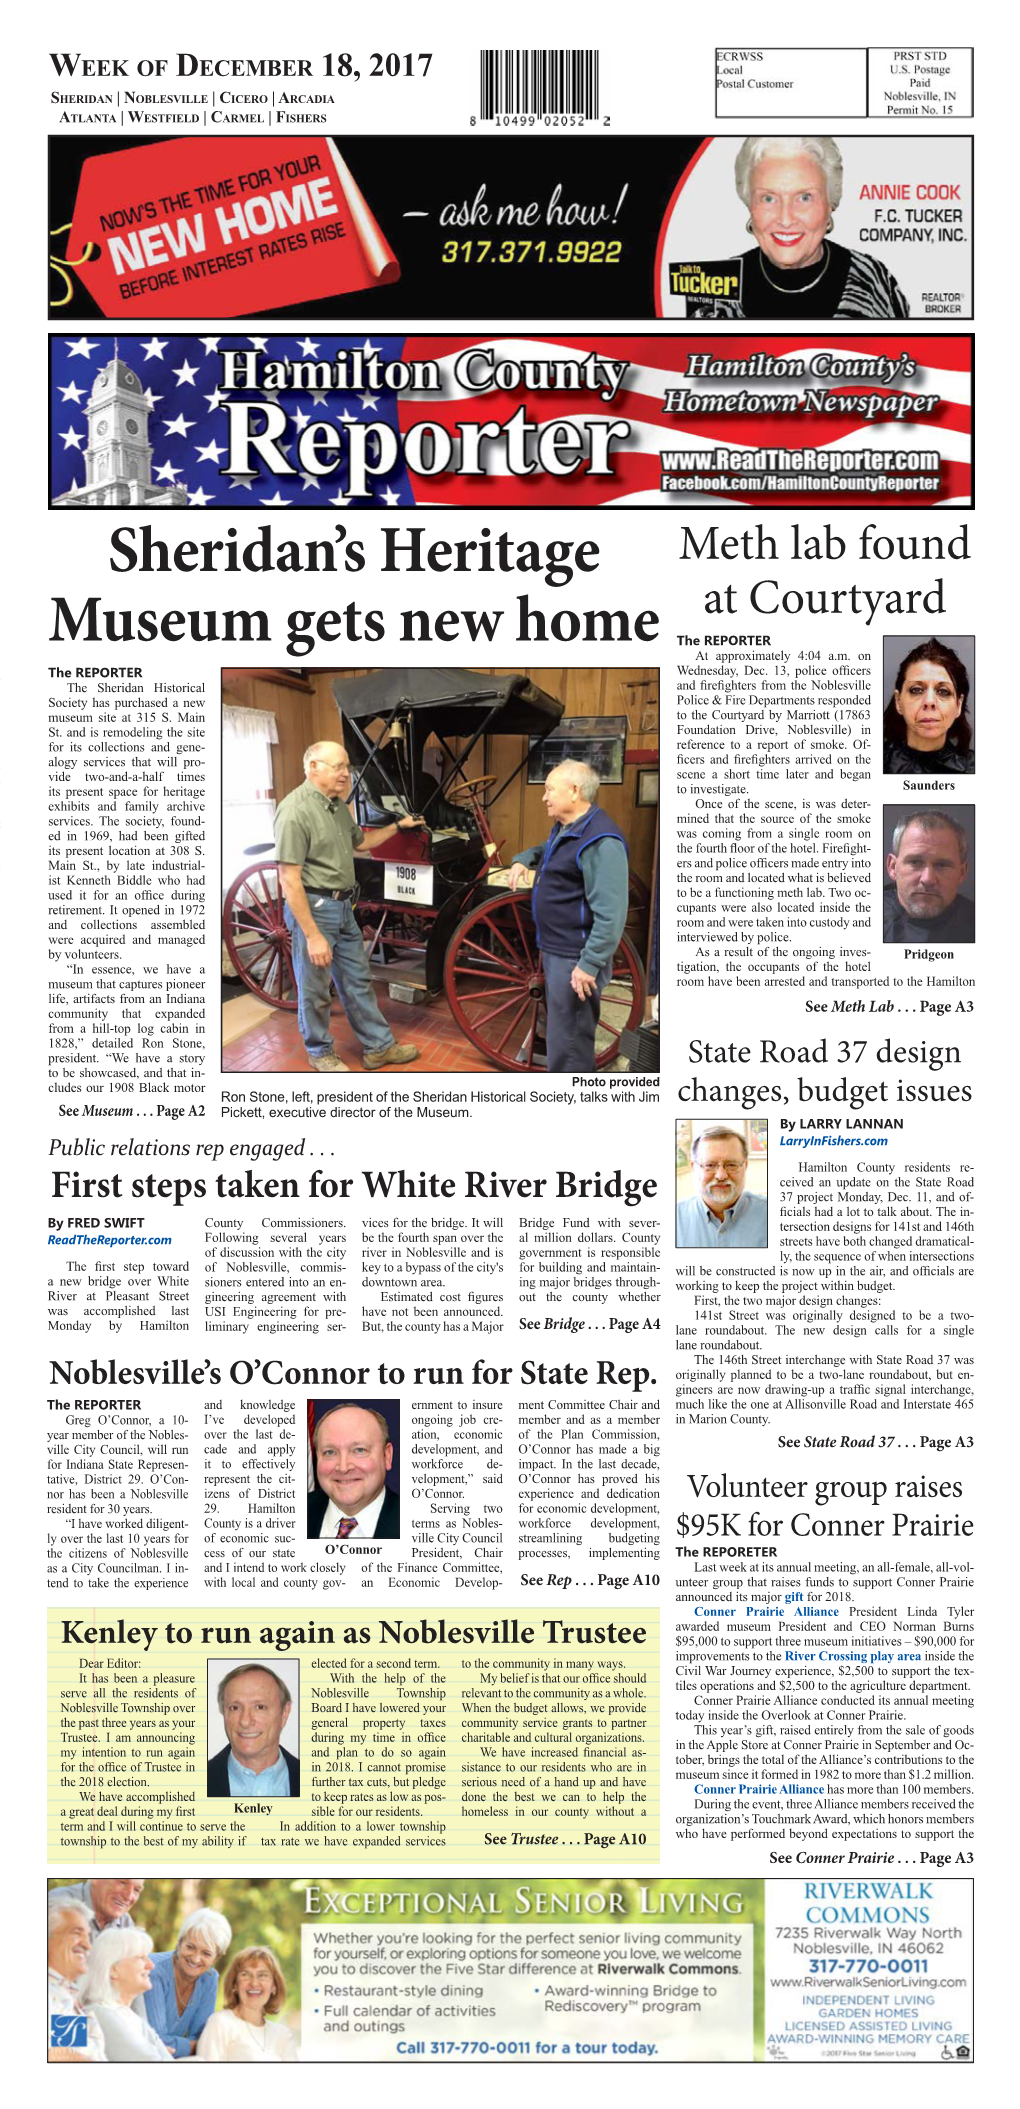 Sheridan's Heritage Museum Gets New Home